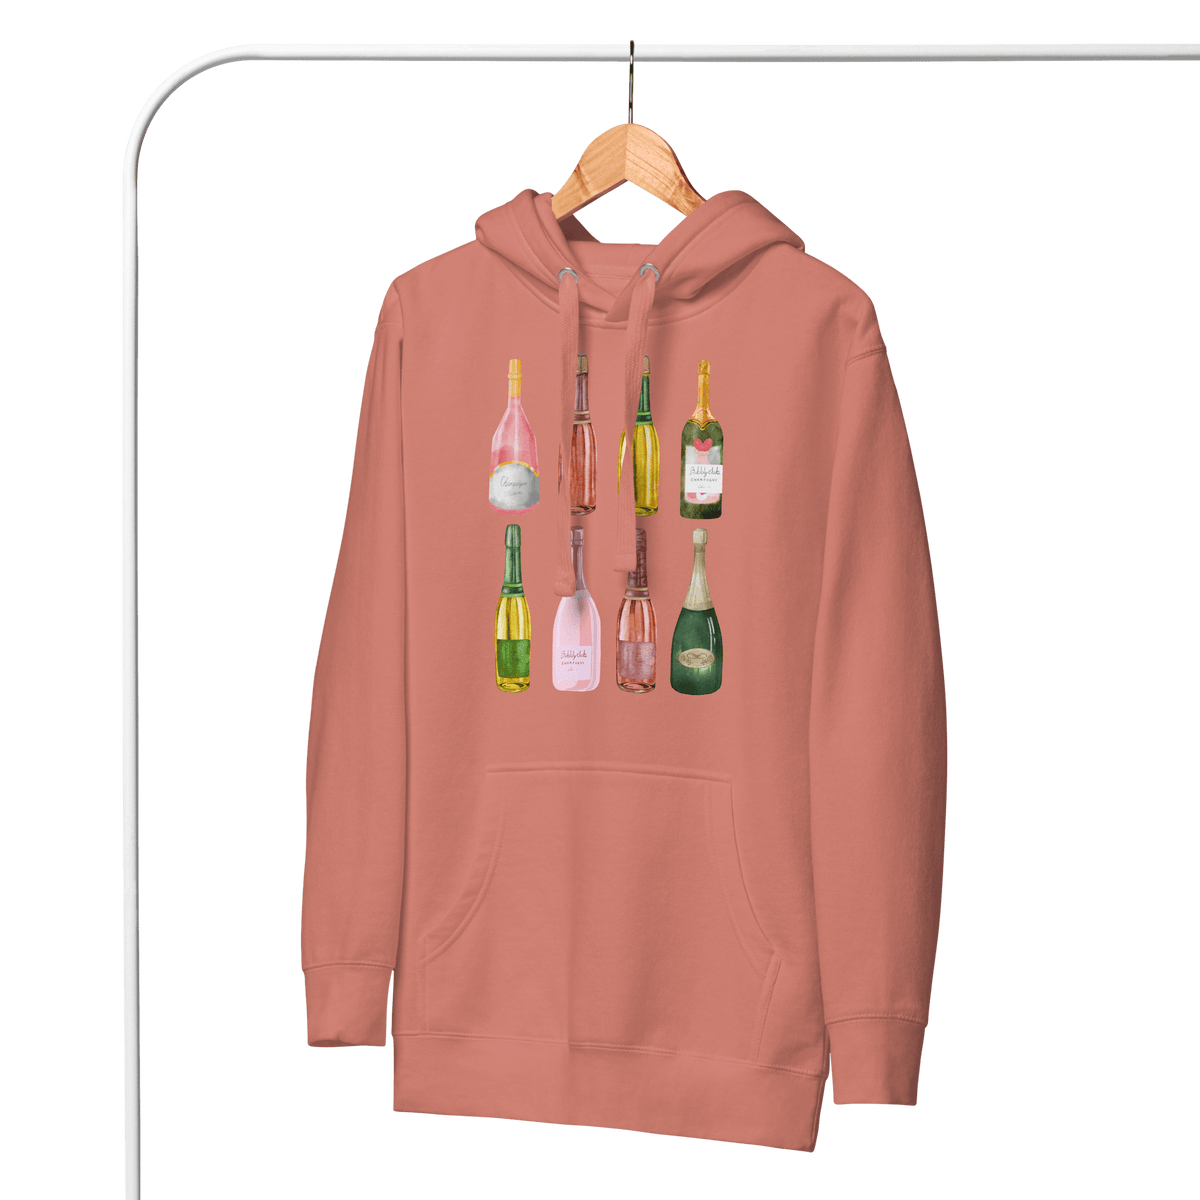 Dusty Rose- yes way rose shirt, liquor t-shirt, gift for mom, gift for him, gift for her, gift for champagne lovers, drinking tee, champagne sweatshirt, champagne shirt, champagne problems sweatshirt, champagne lovers, champagne bottles tee, alcohol tee, hoodie, champagne bottles hoodie